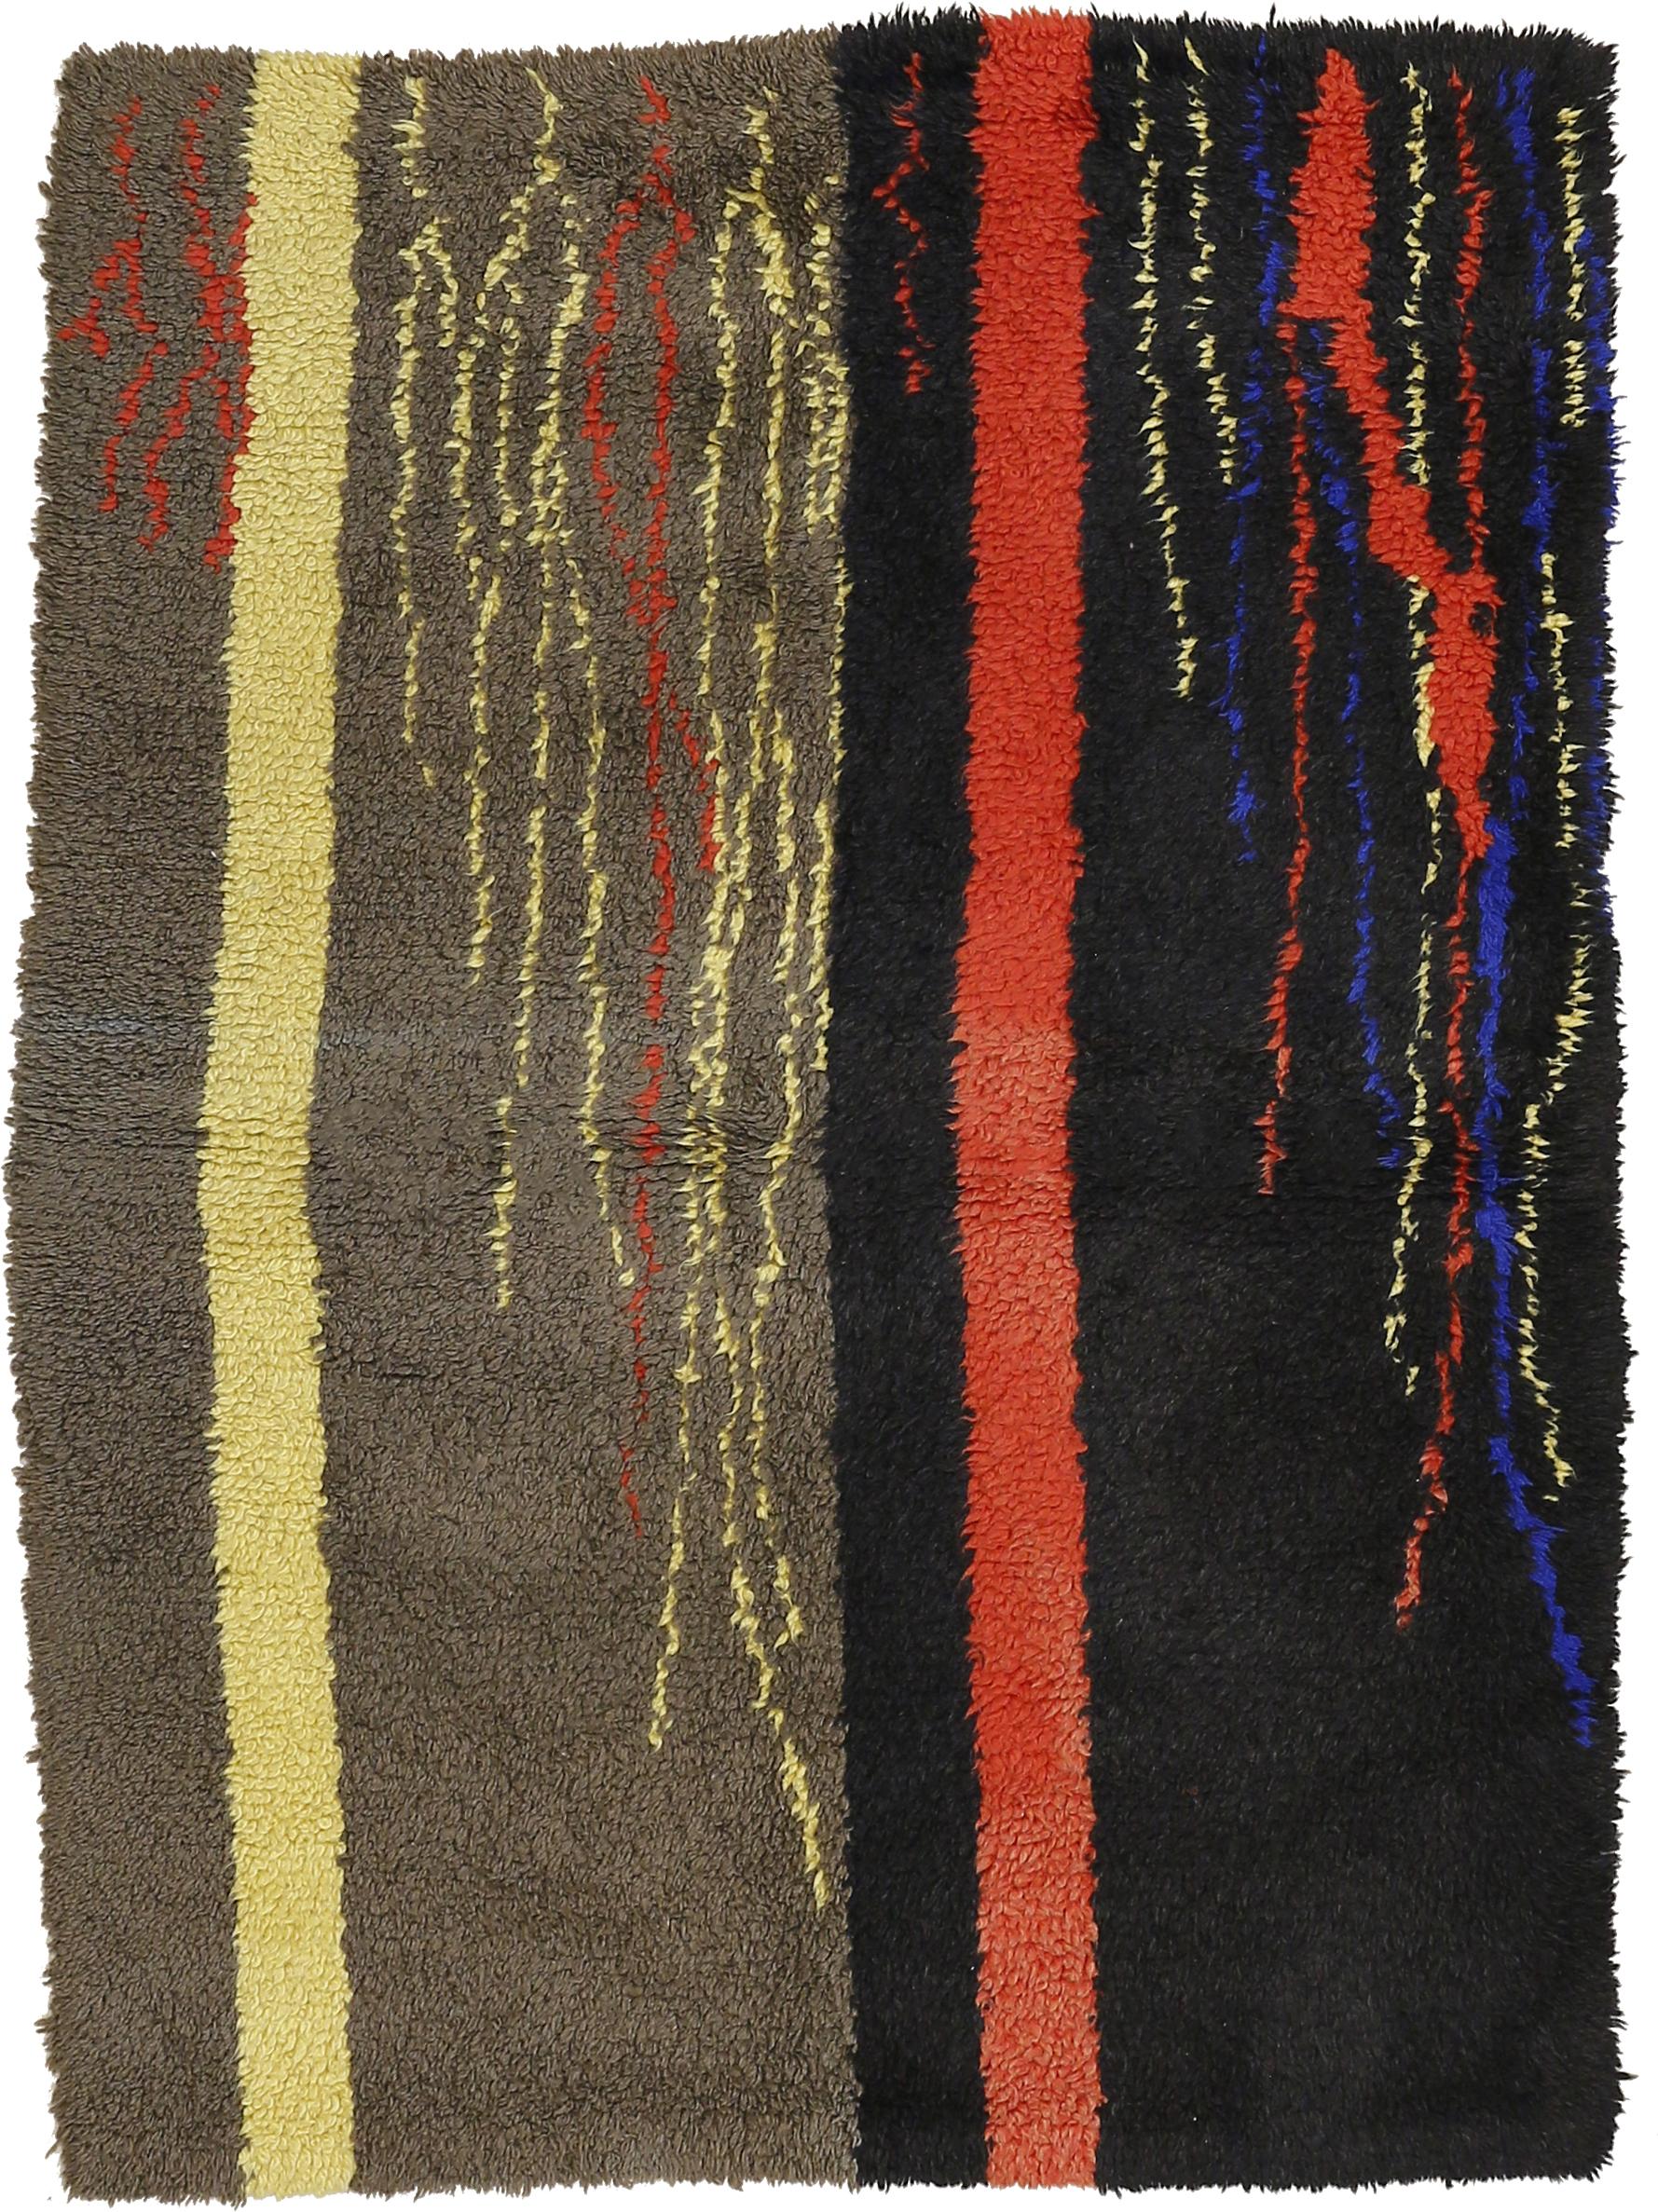 Influenced by the abstract patterns of Berber weavings from the Middle Atlas called 'Boujad', which were avidly collected by many French artists during the colonial period, this rug displays the experimental nature of French carpets after World War